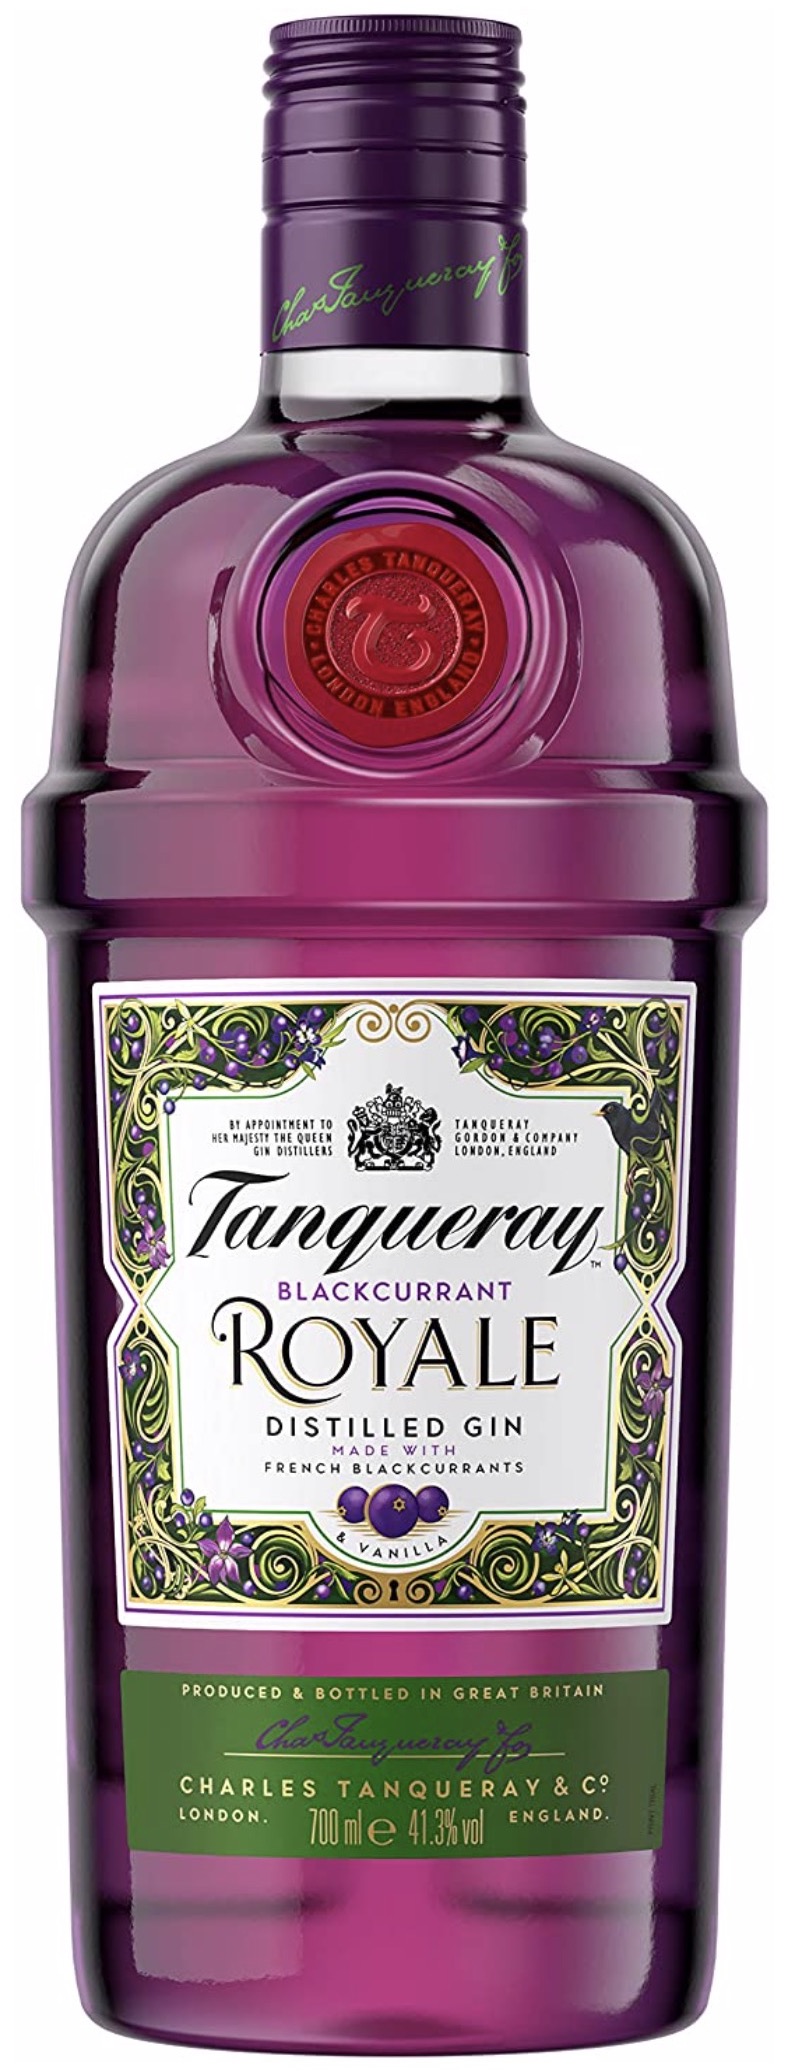 Tanqueray Blackcurrant Royale Gin 41,3% vol. 0,7L